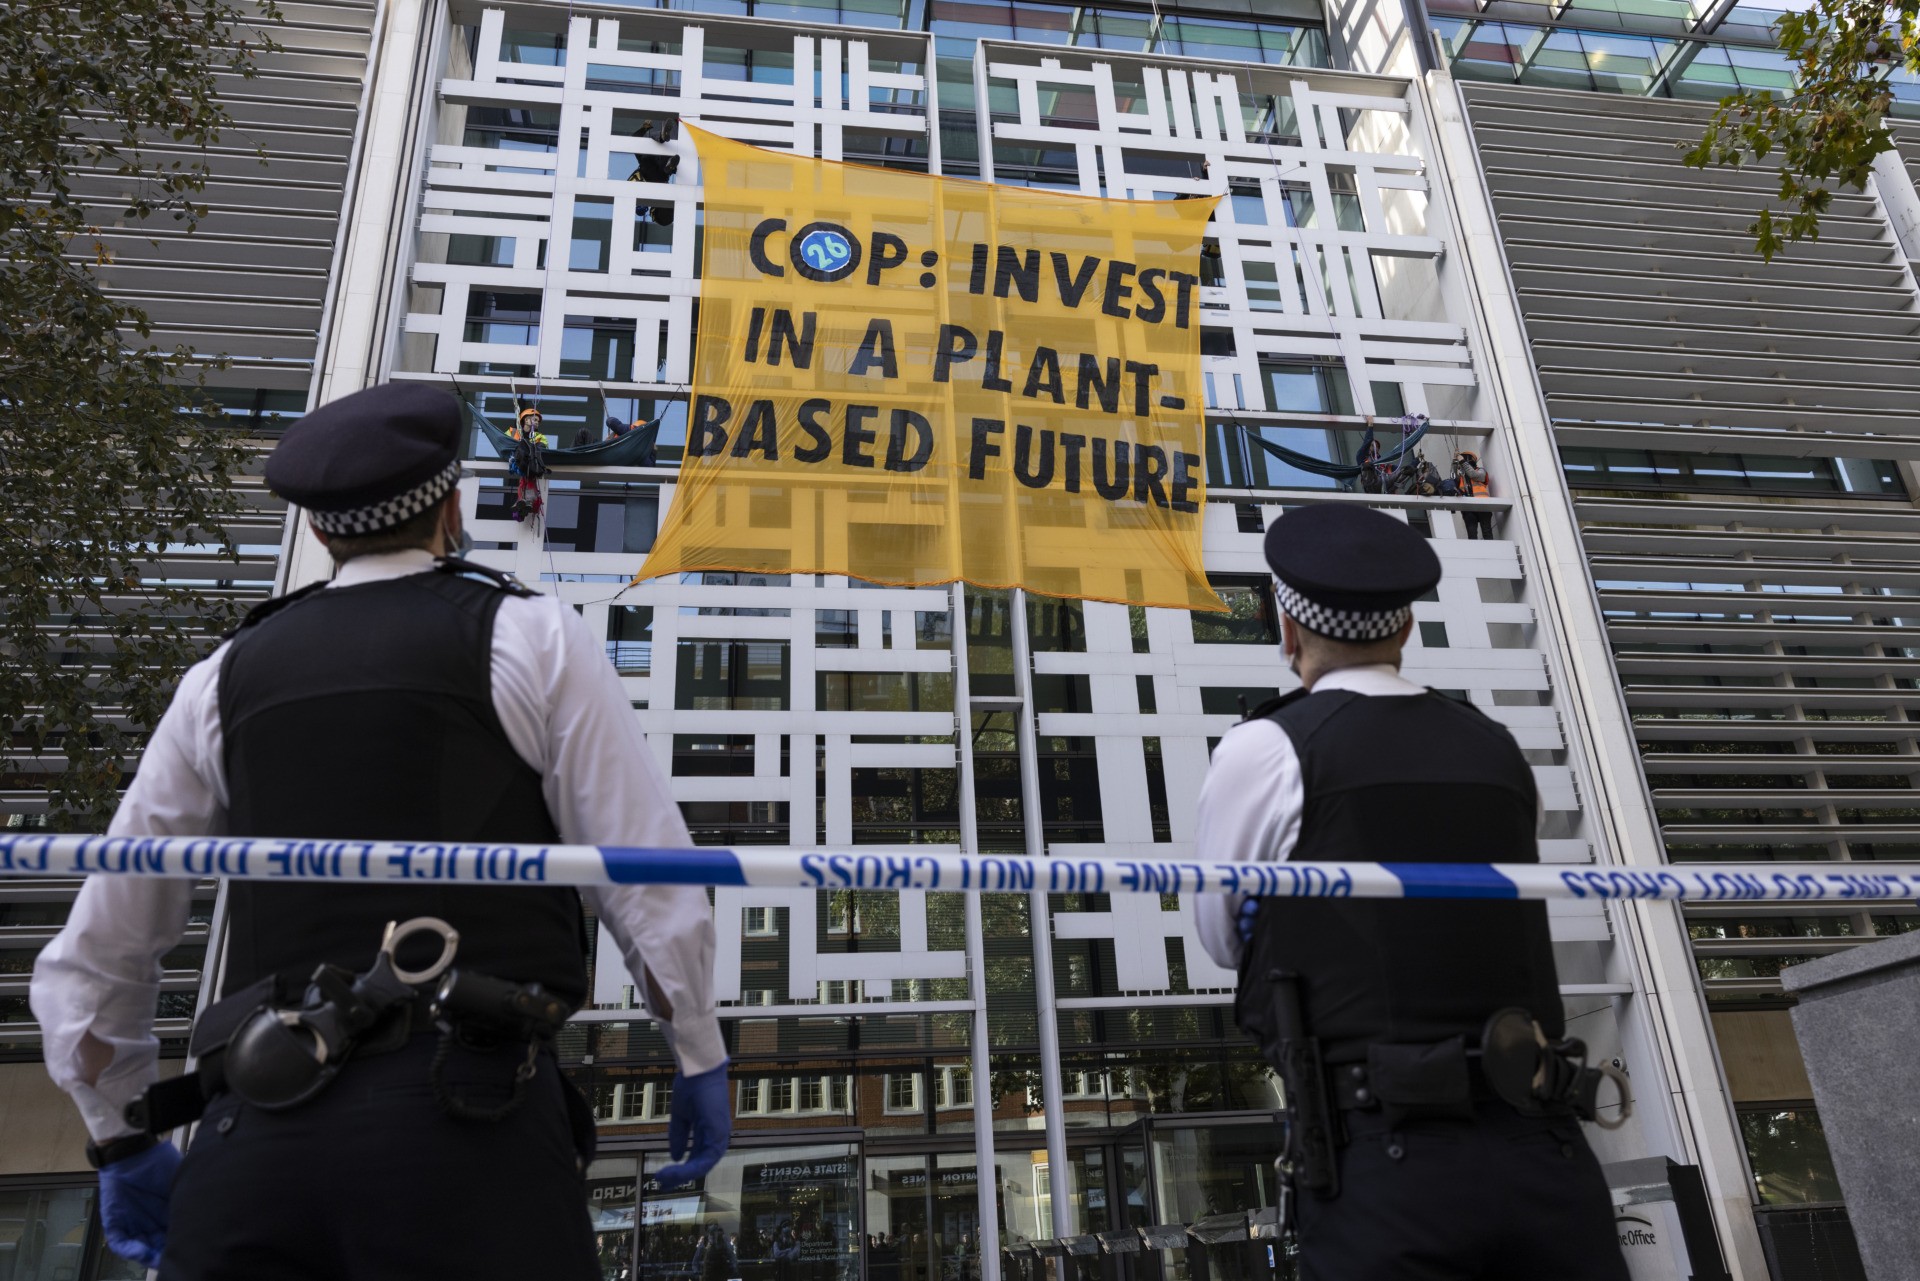 LONDON, ENGLAND - OCTOBER 26: Police move in to cut down a banner as Environmental activists remain at the Home Office on October 26, 2021 in London, England. Protesters dropped a banner from the building reading "COP: Invest In A Plant-Based Future," referring to the upcoming United Nations Conference On Climate Change (COP26) in Glasgow that starts this weekend. (Photo by Dan Kitwood/Getty Images)